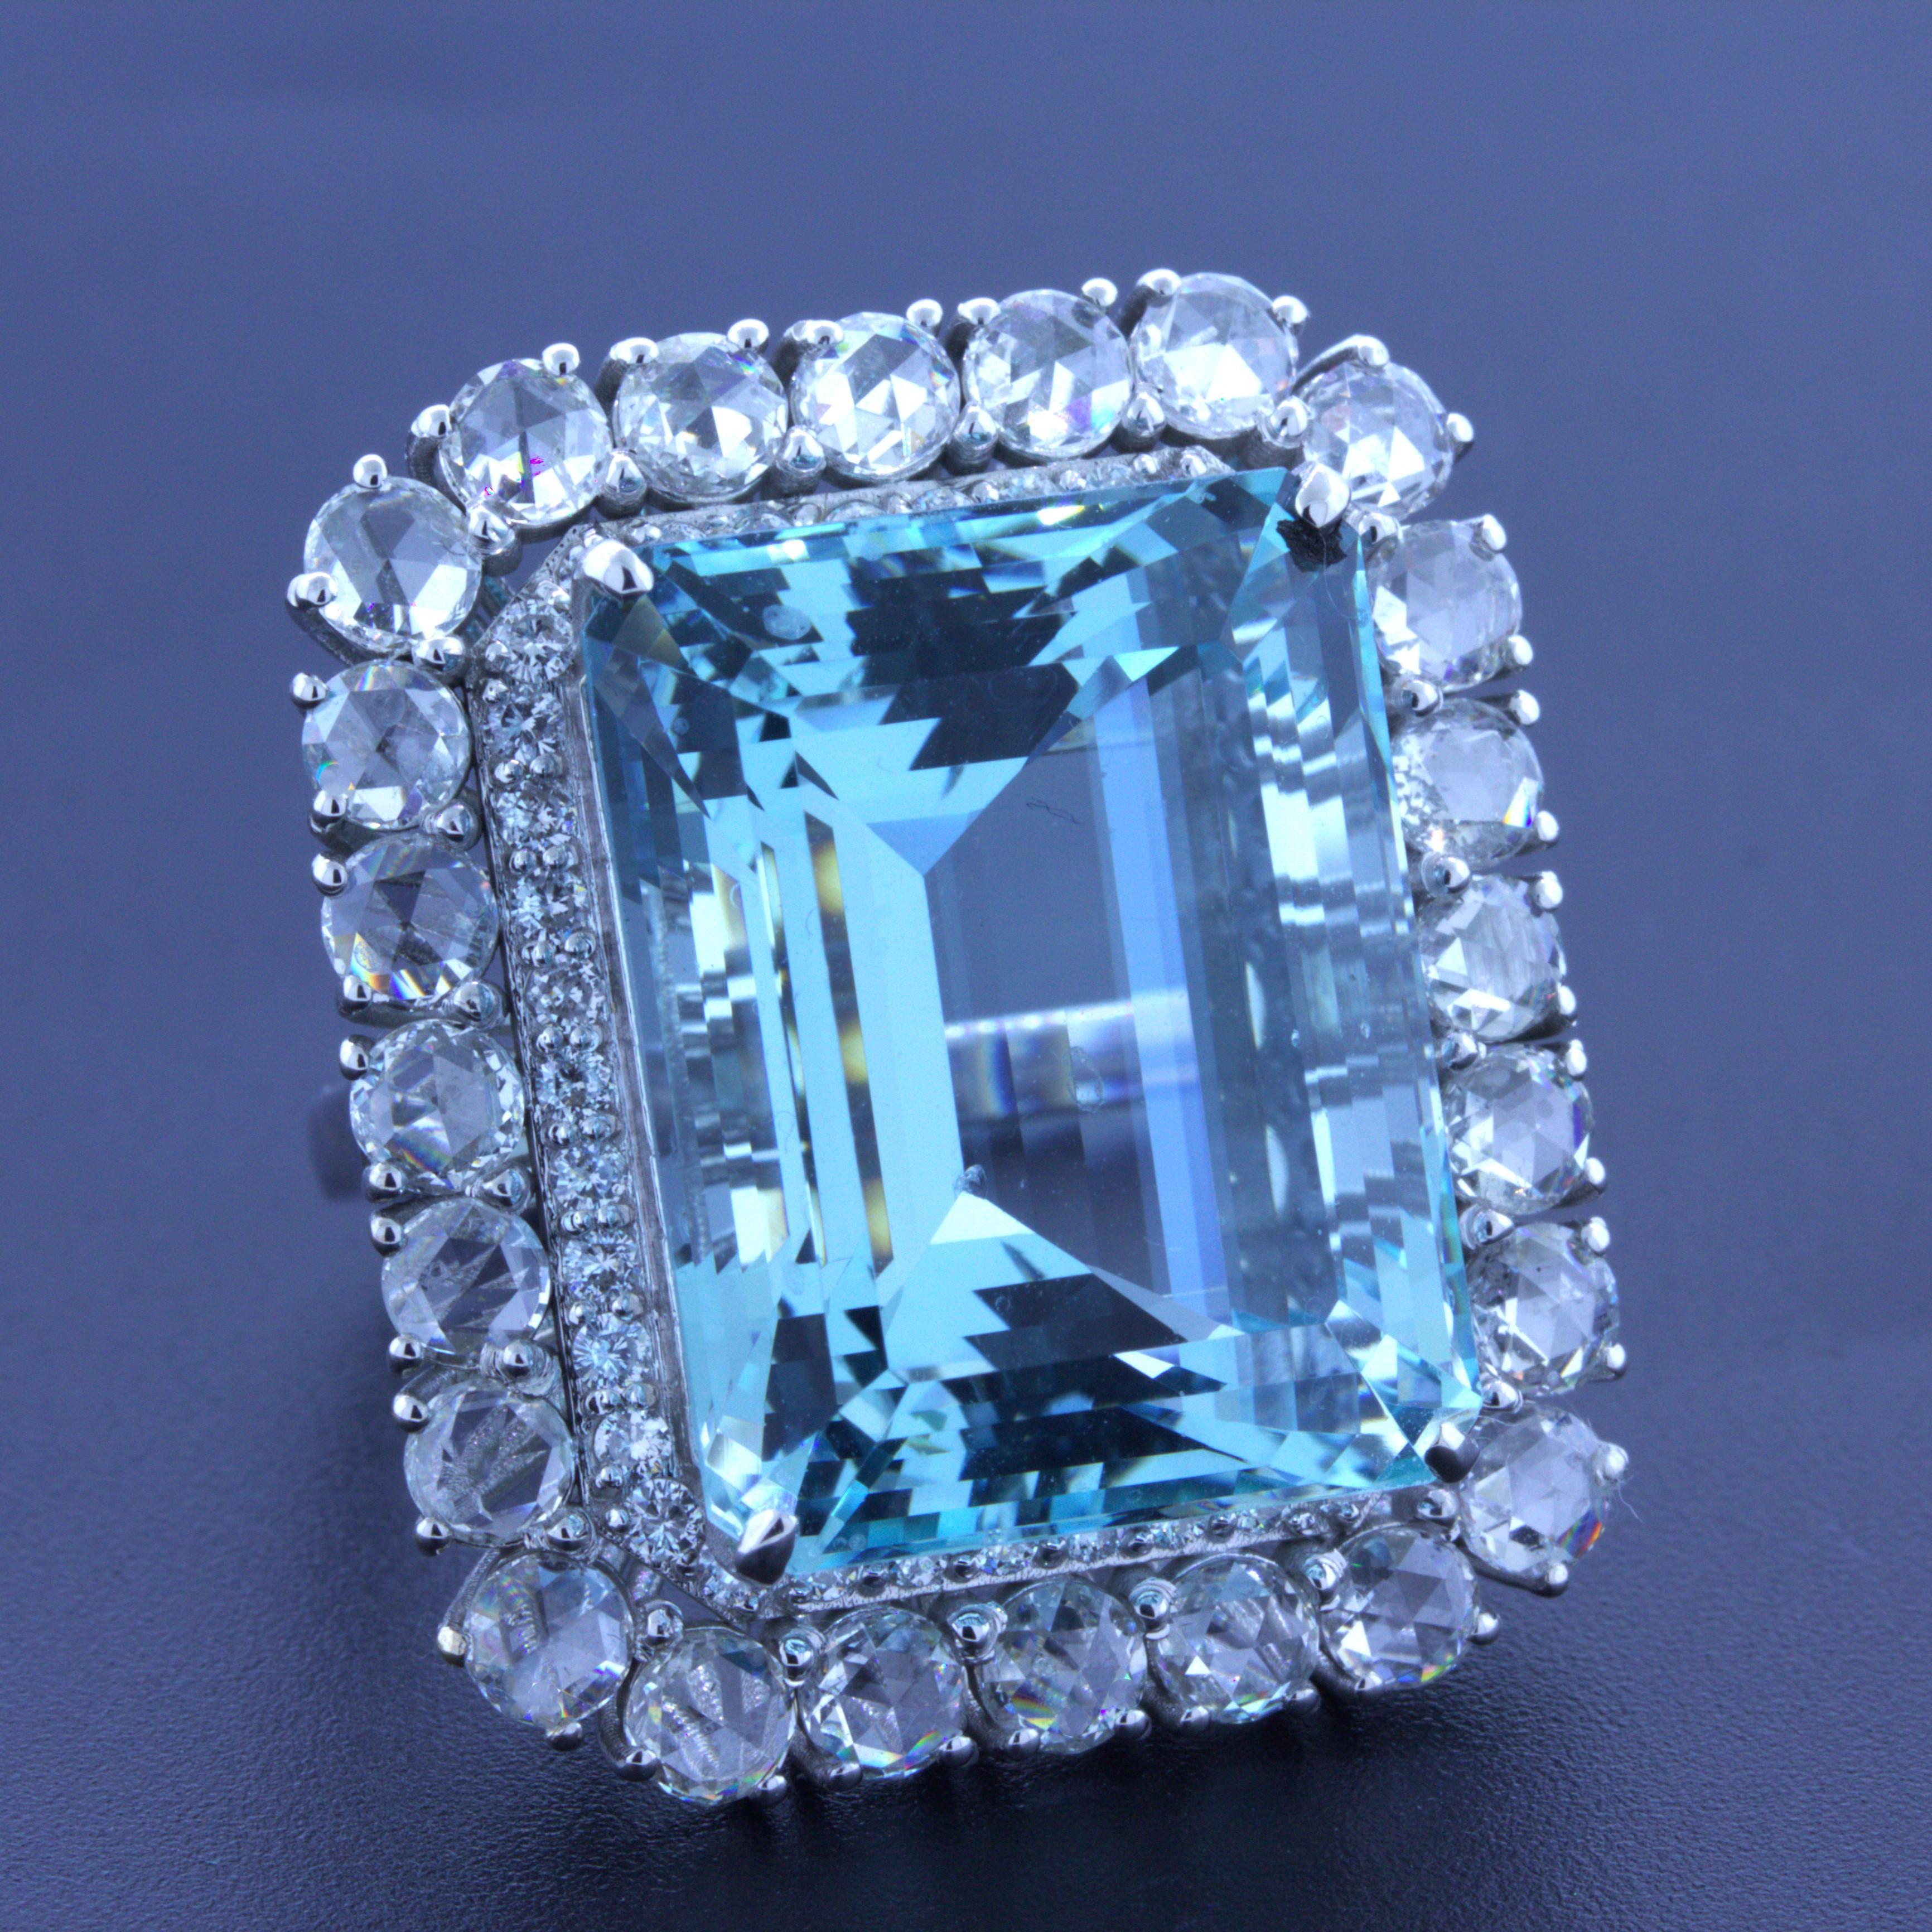 A massive aquamarine and cocktail ring ready to make a statement! The aquamarine weighs a very impressive 35.28 carats and has a lovely emerald-cut shape with a rich sea-blue color aquamarine is famous for. Adding to that, the aquamarine is super